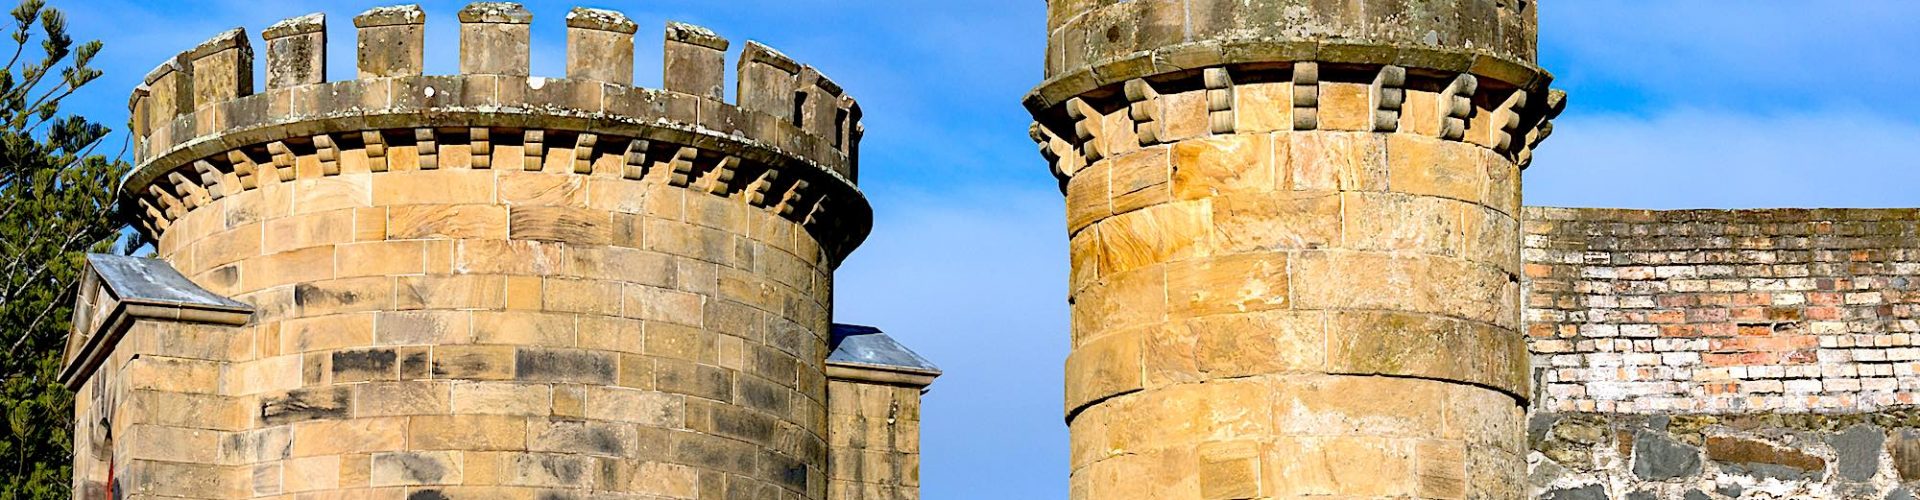 Review: Port Arthur Historic Site is a fascinating window on our convict past, TAS inner banner